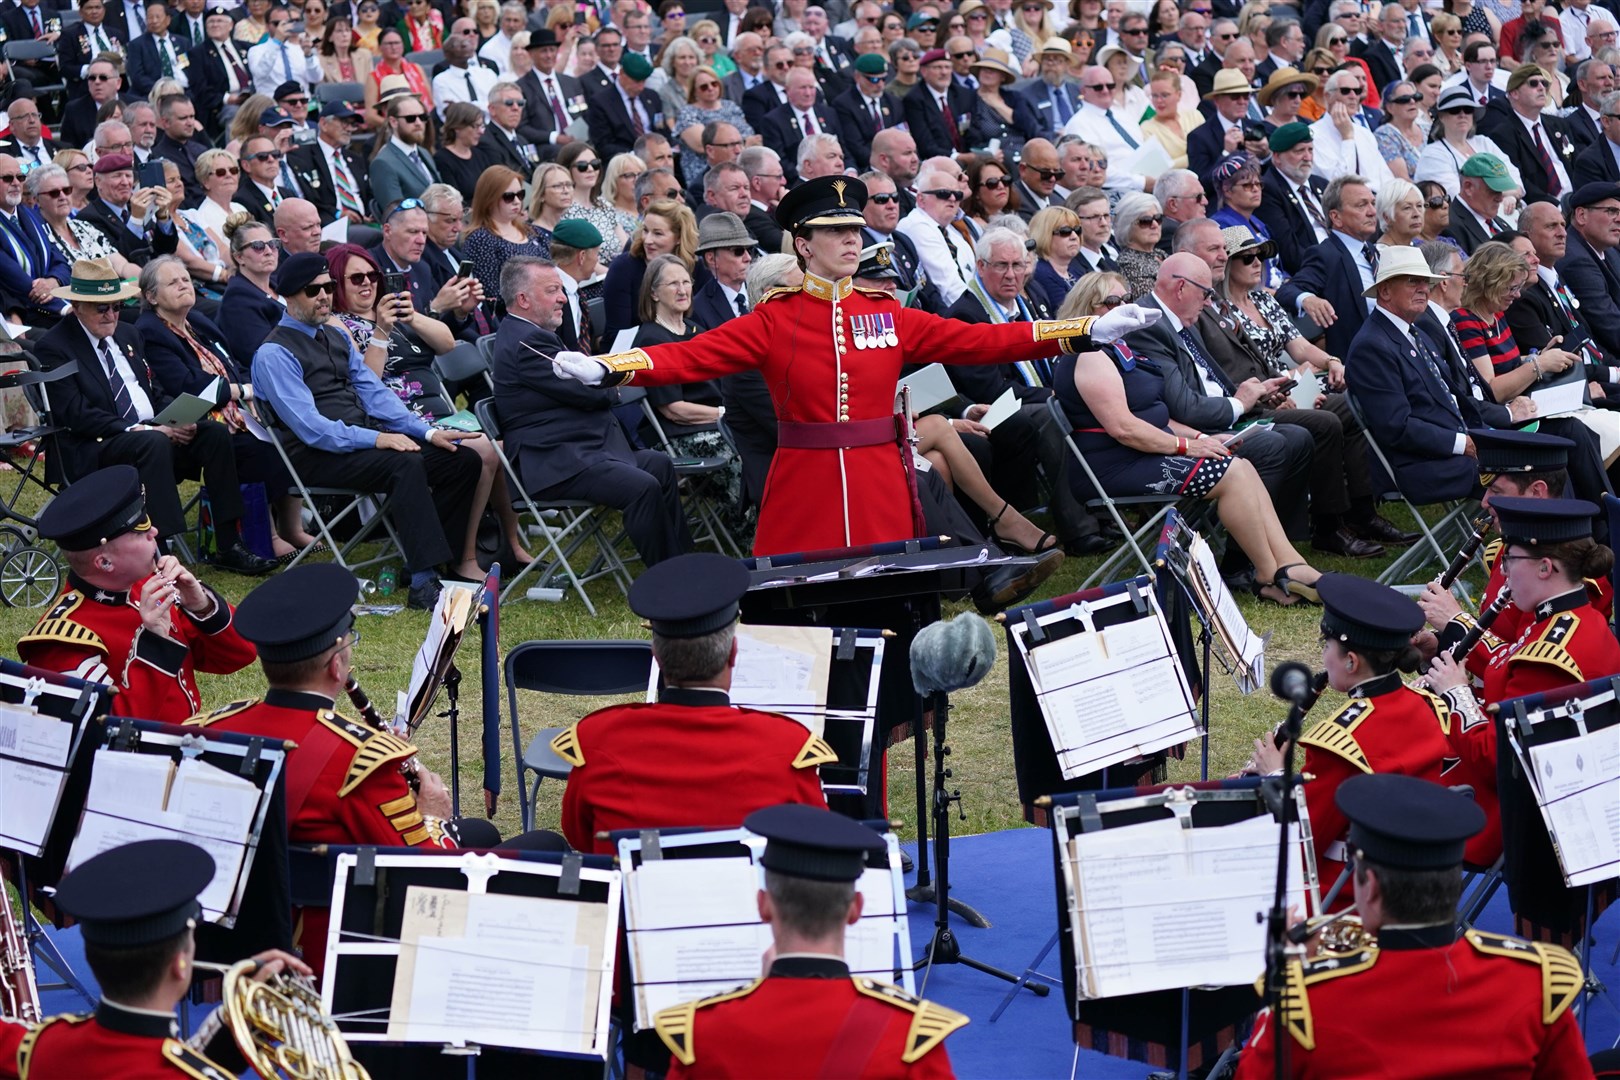 The service of remembrance at the National Memorial Arboretum (Jacob King/PA)